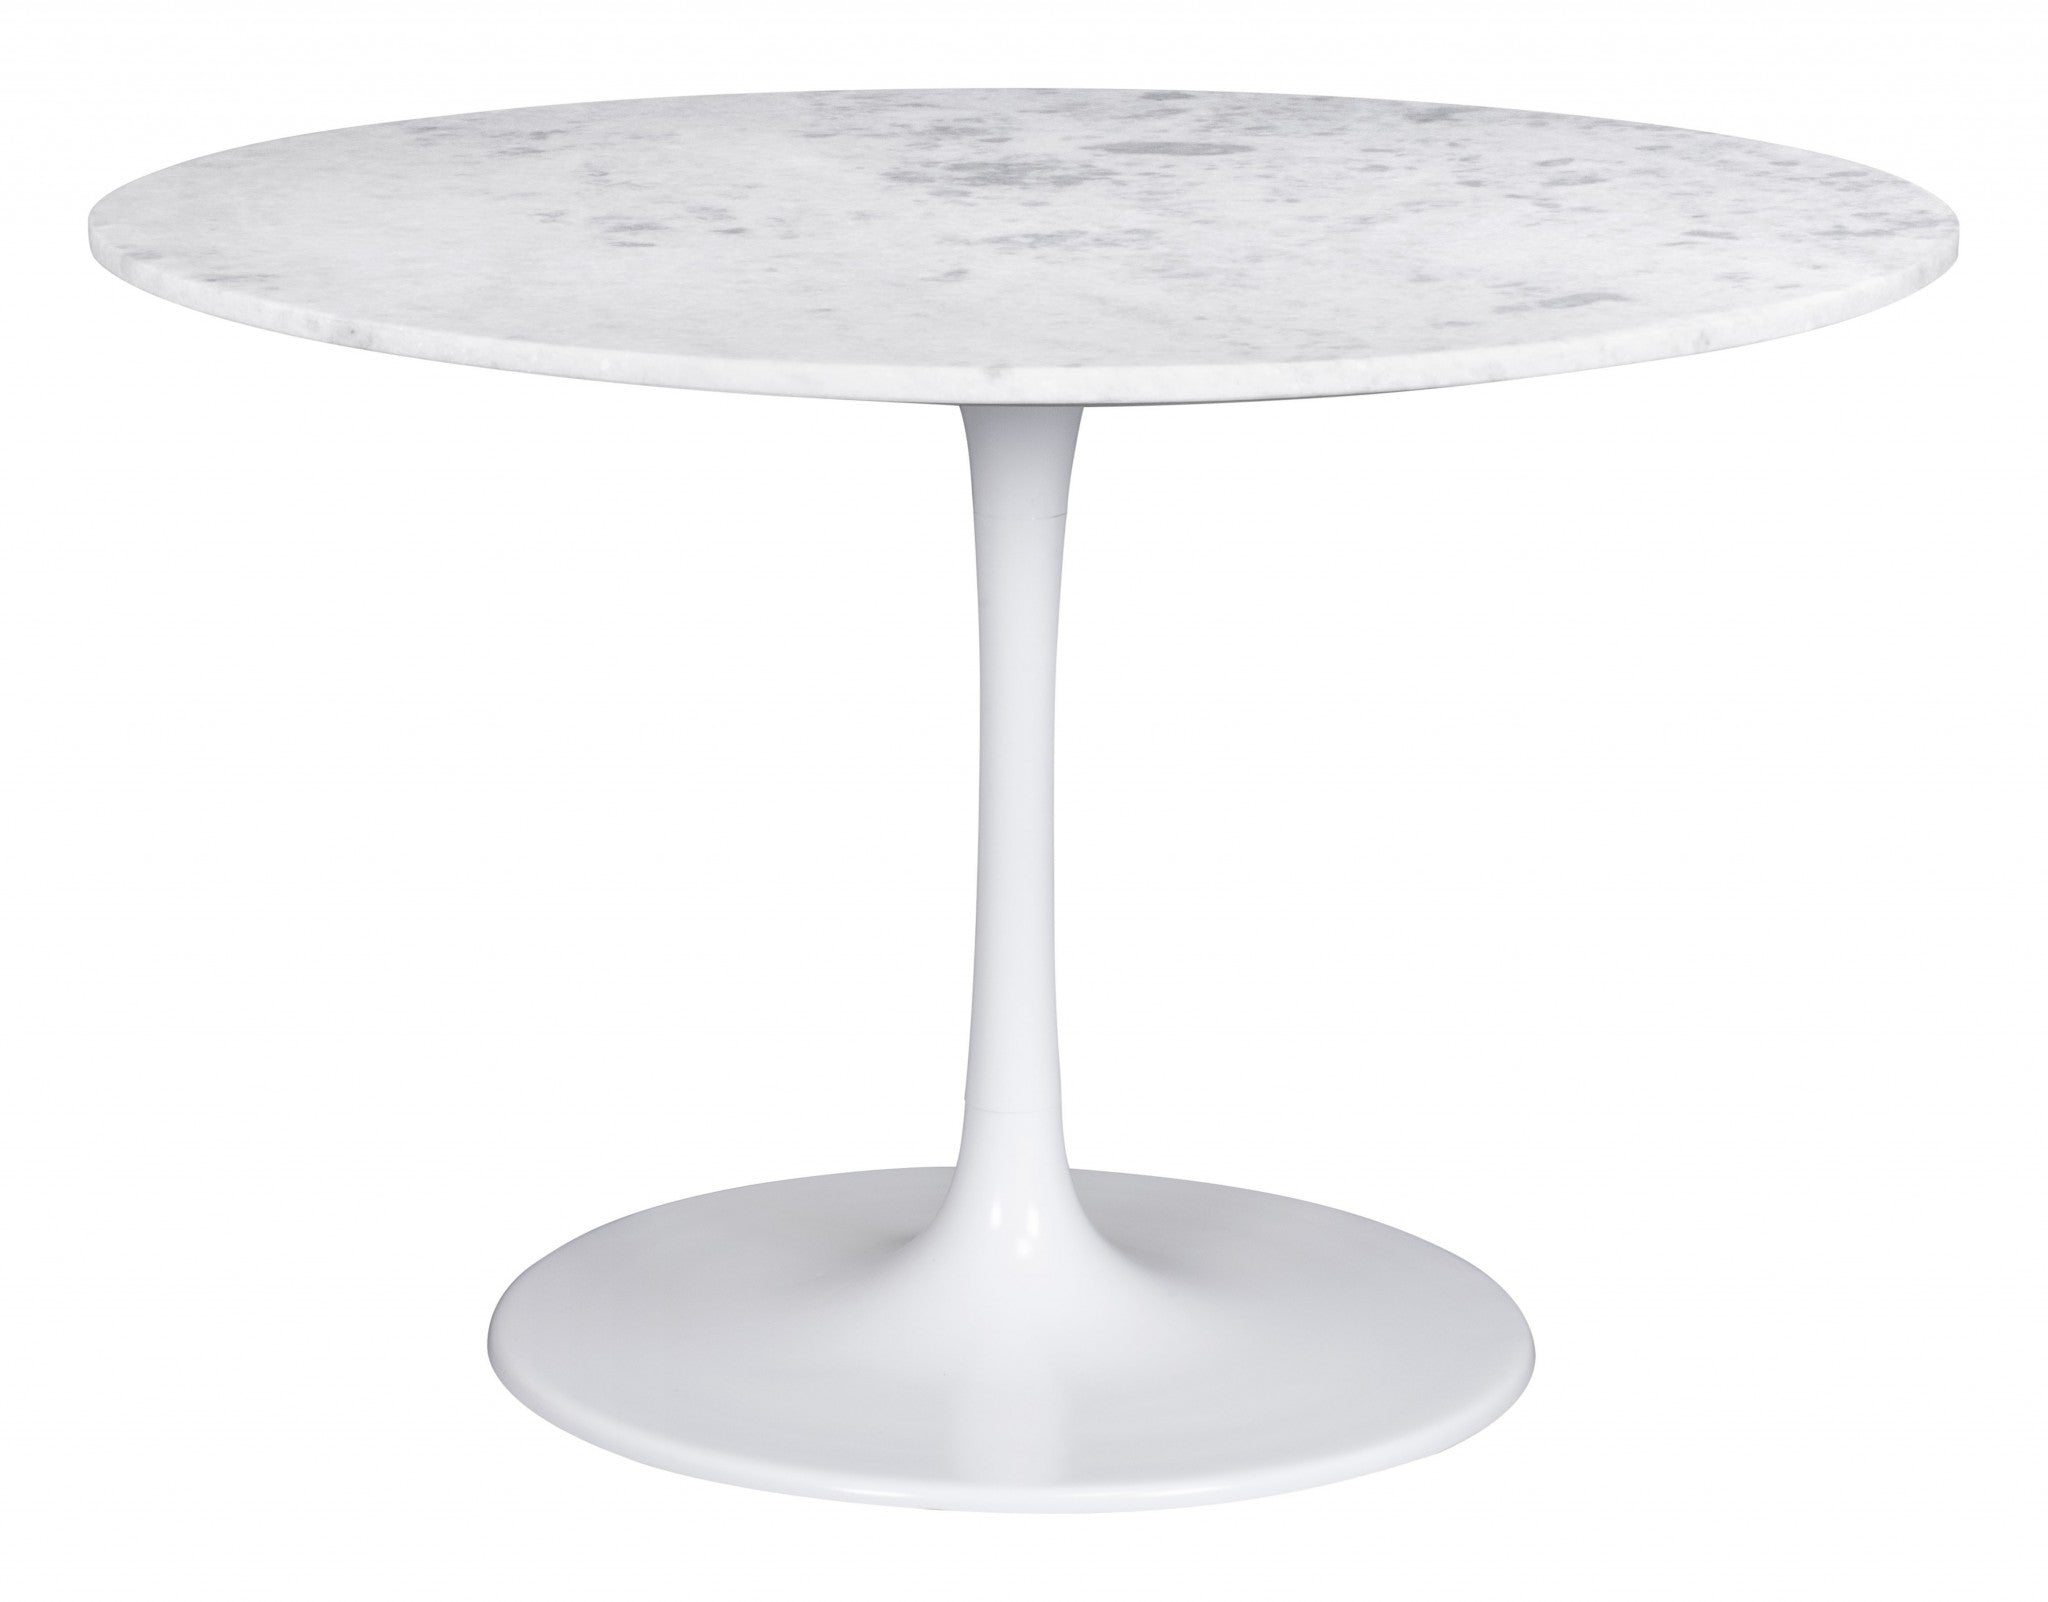 47" White Rounded Marble And Steel Dining Table